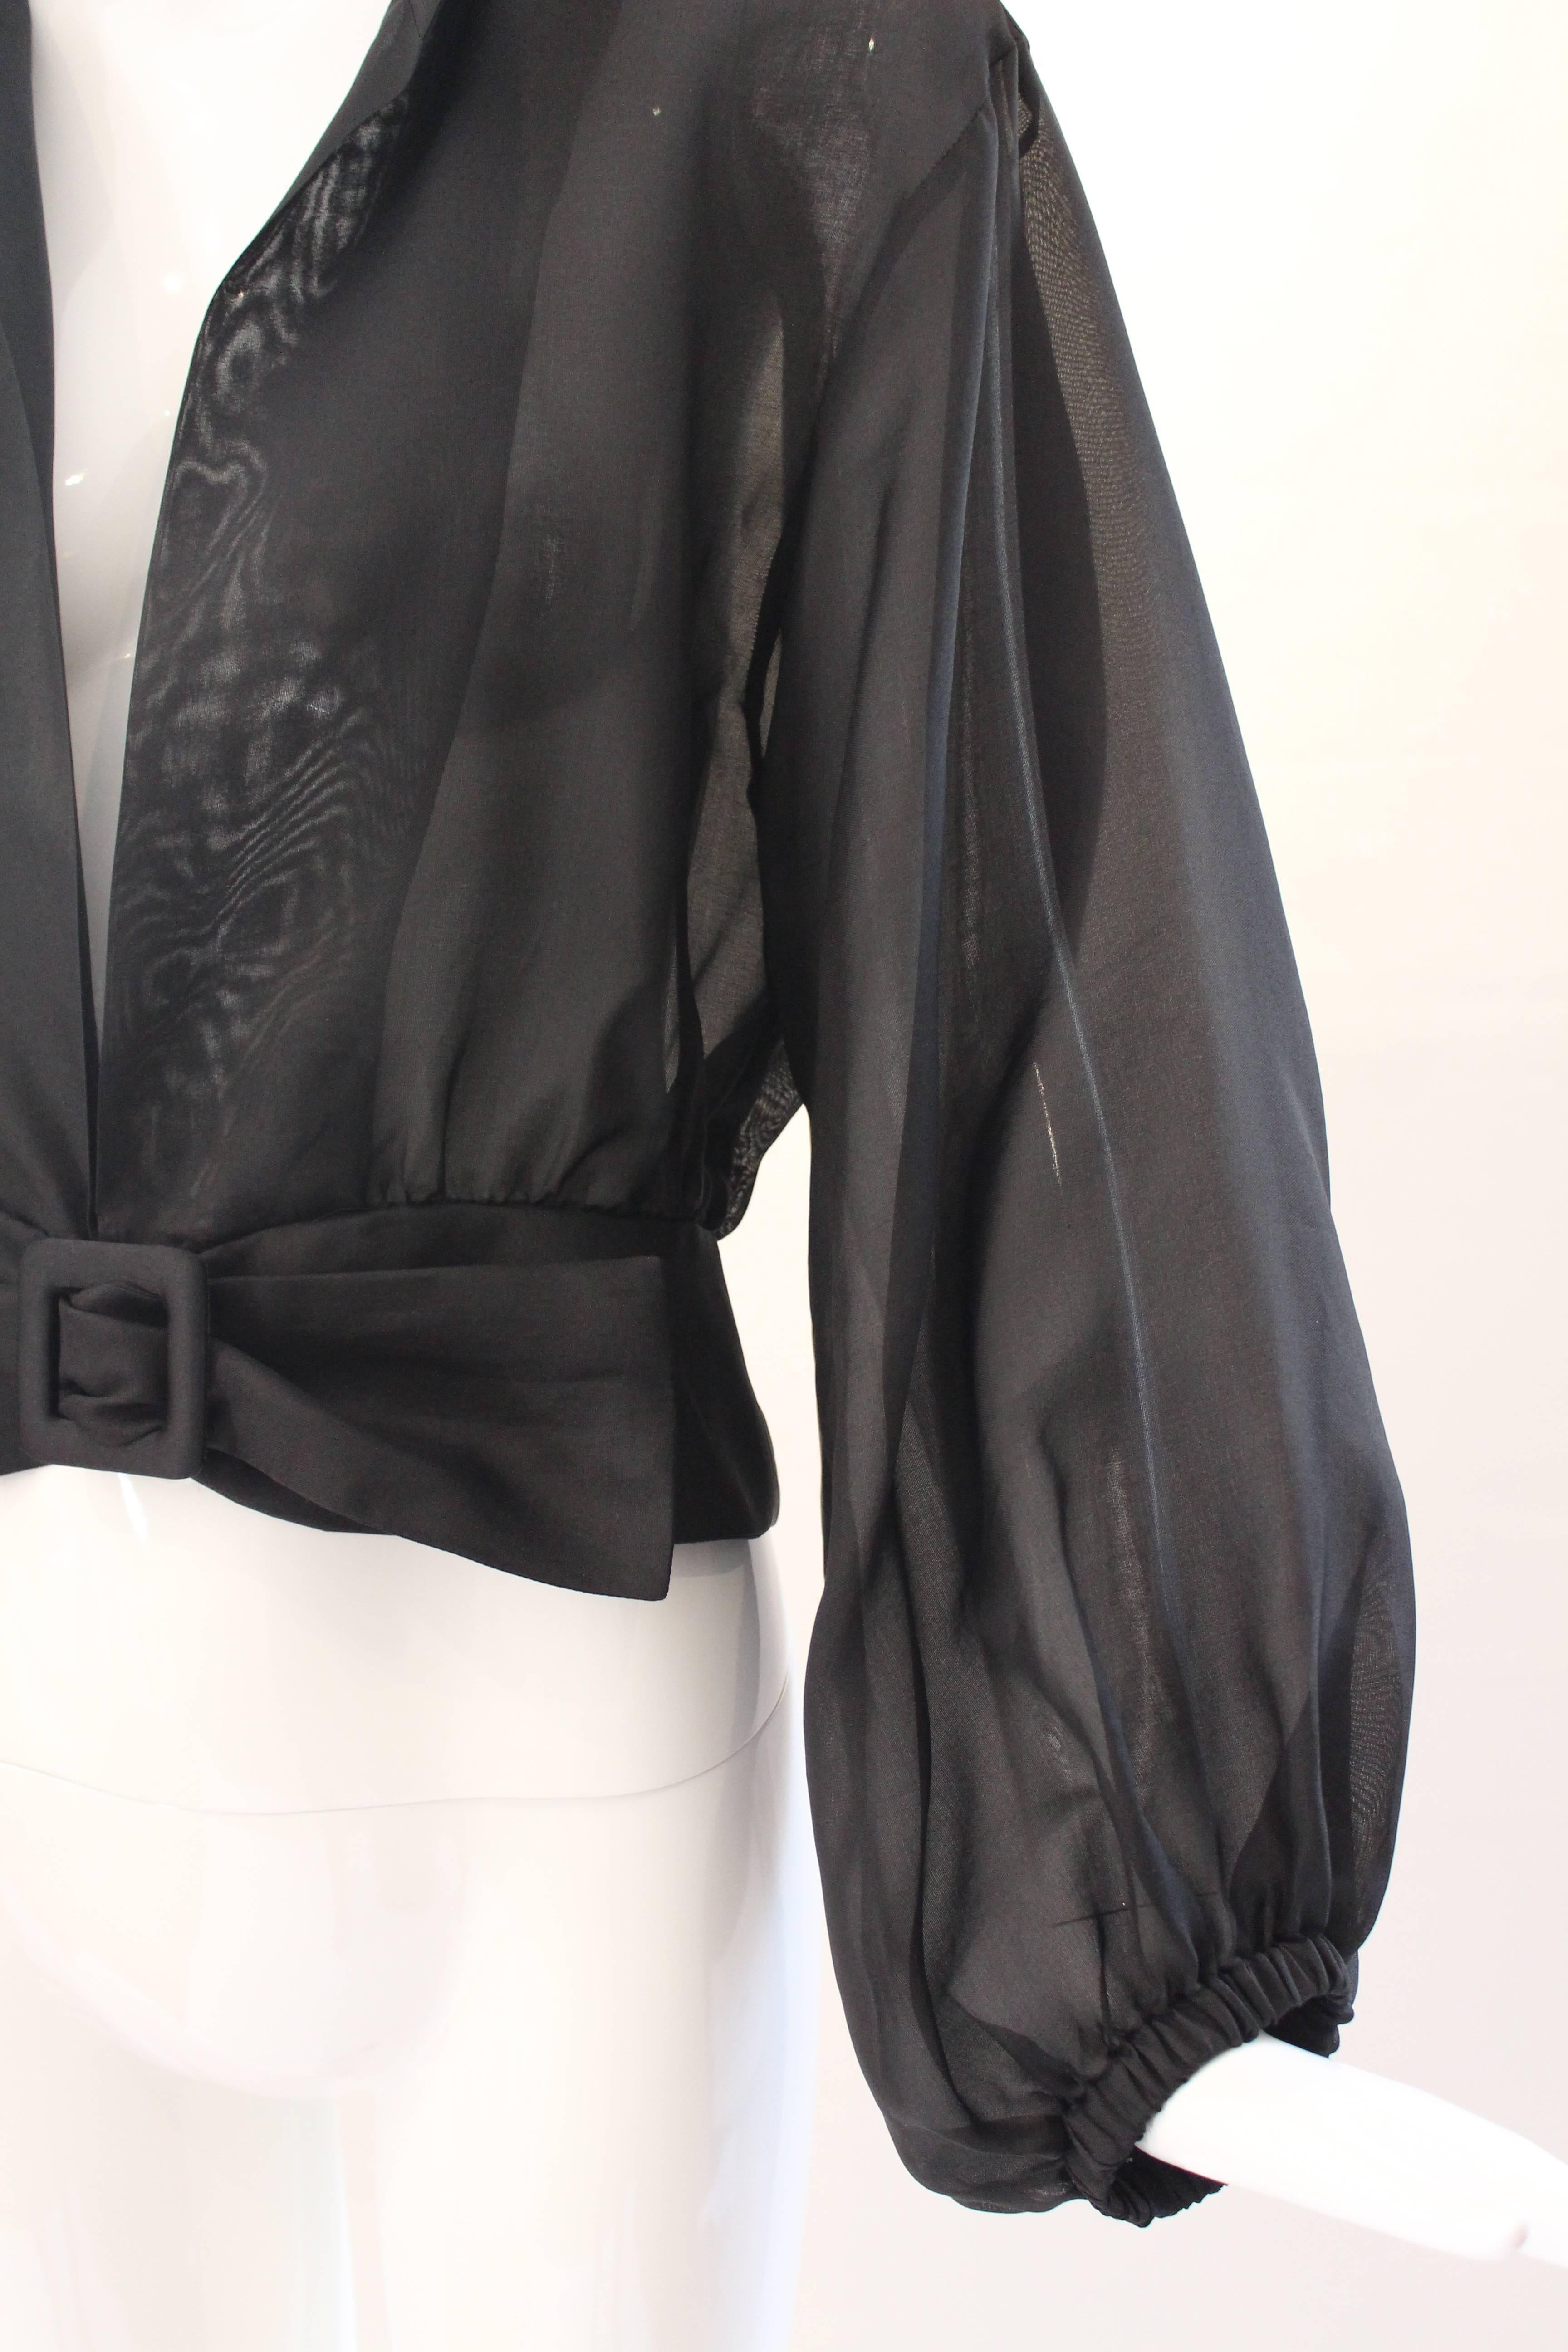 Yves Saint Laurent Rive Gauche Black Sheer Blouse Jacket  In Excellent Condition In Houston, TX